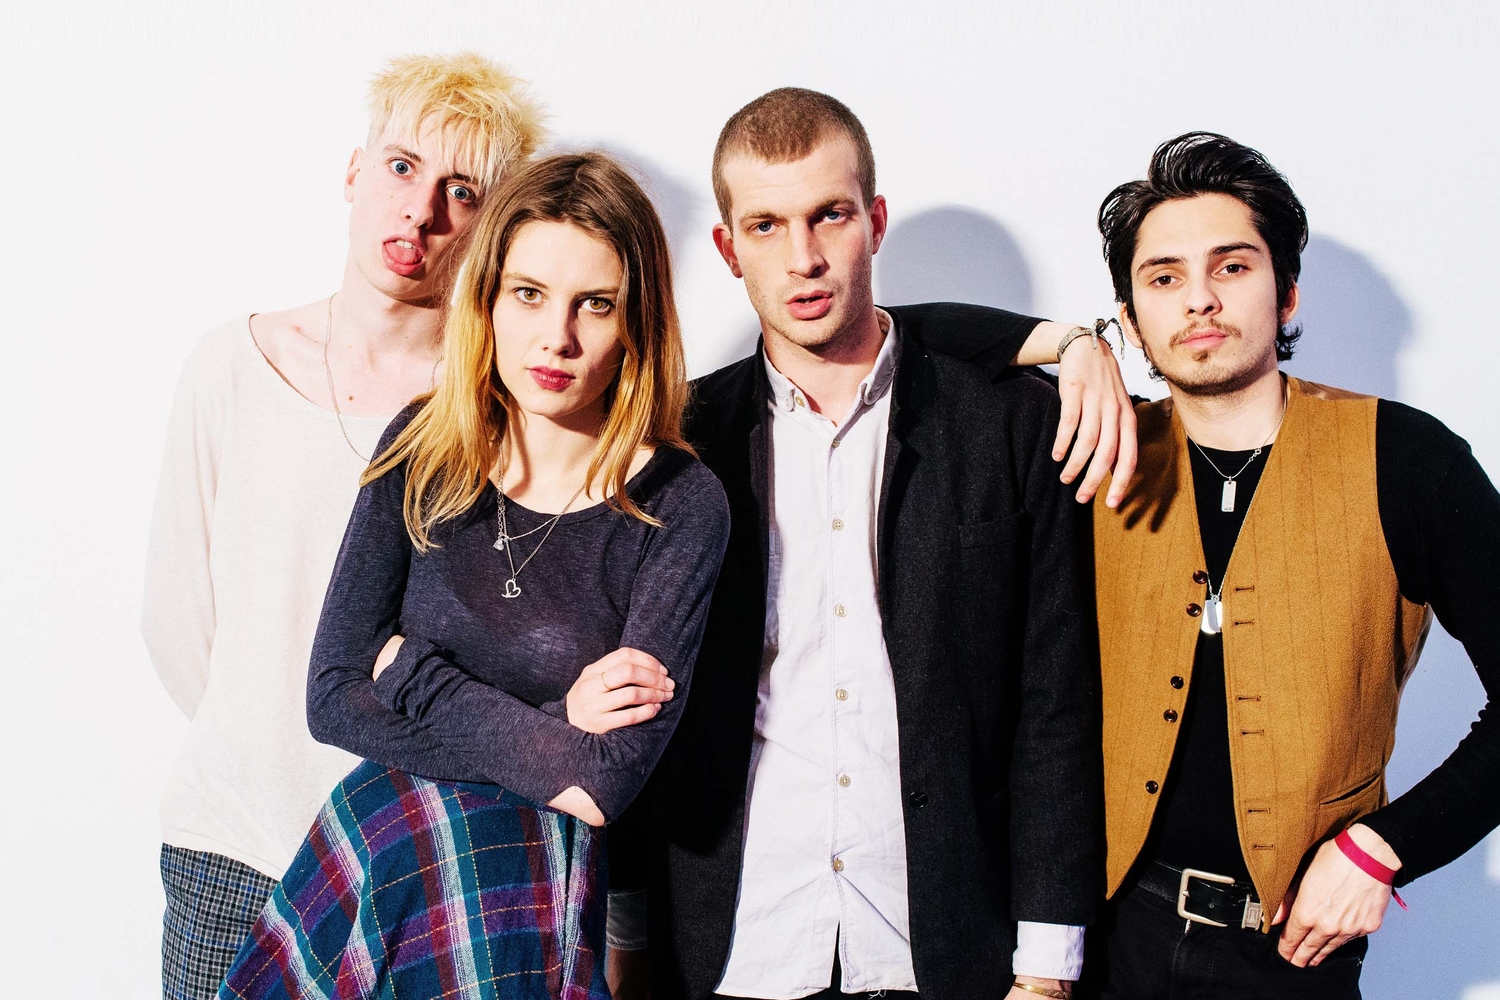 New issue of DIY out now featuring Jungle, Wolf Alice, Peace & more